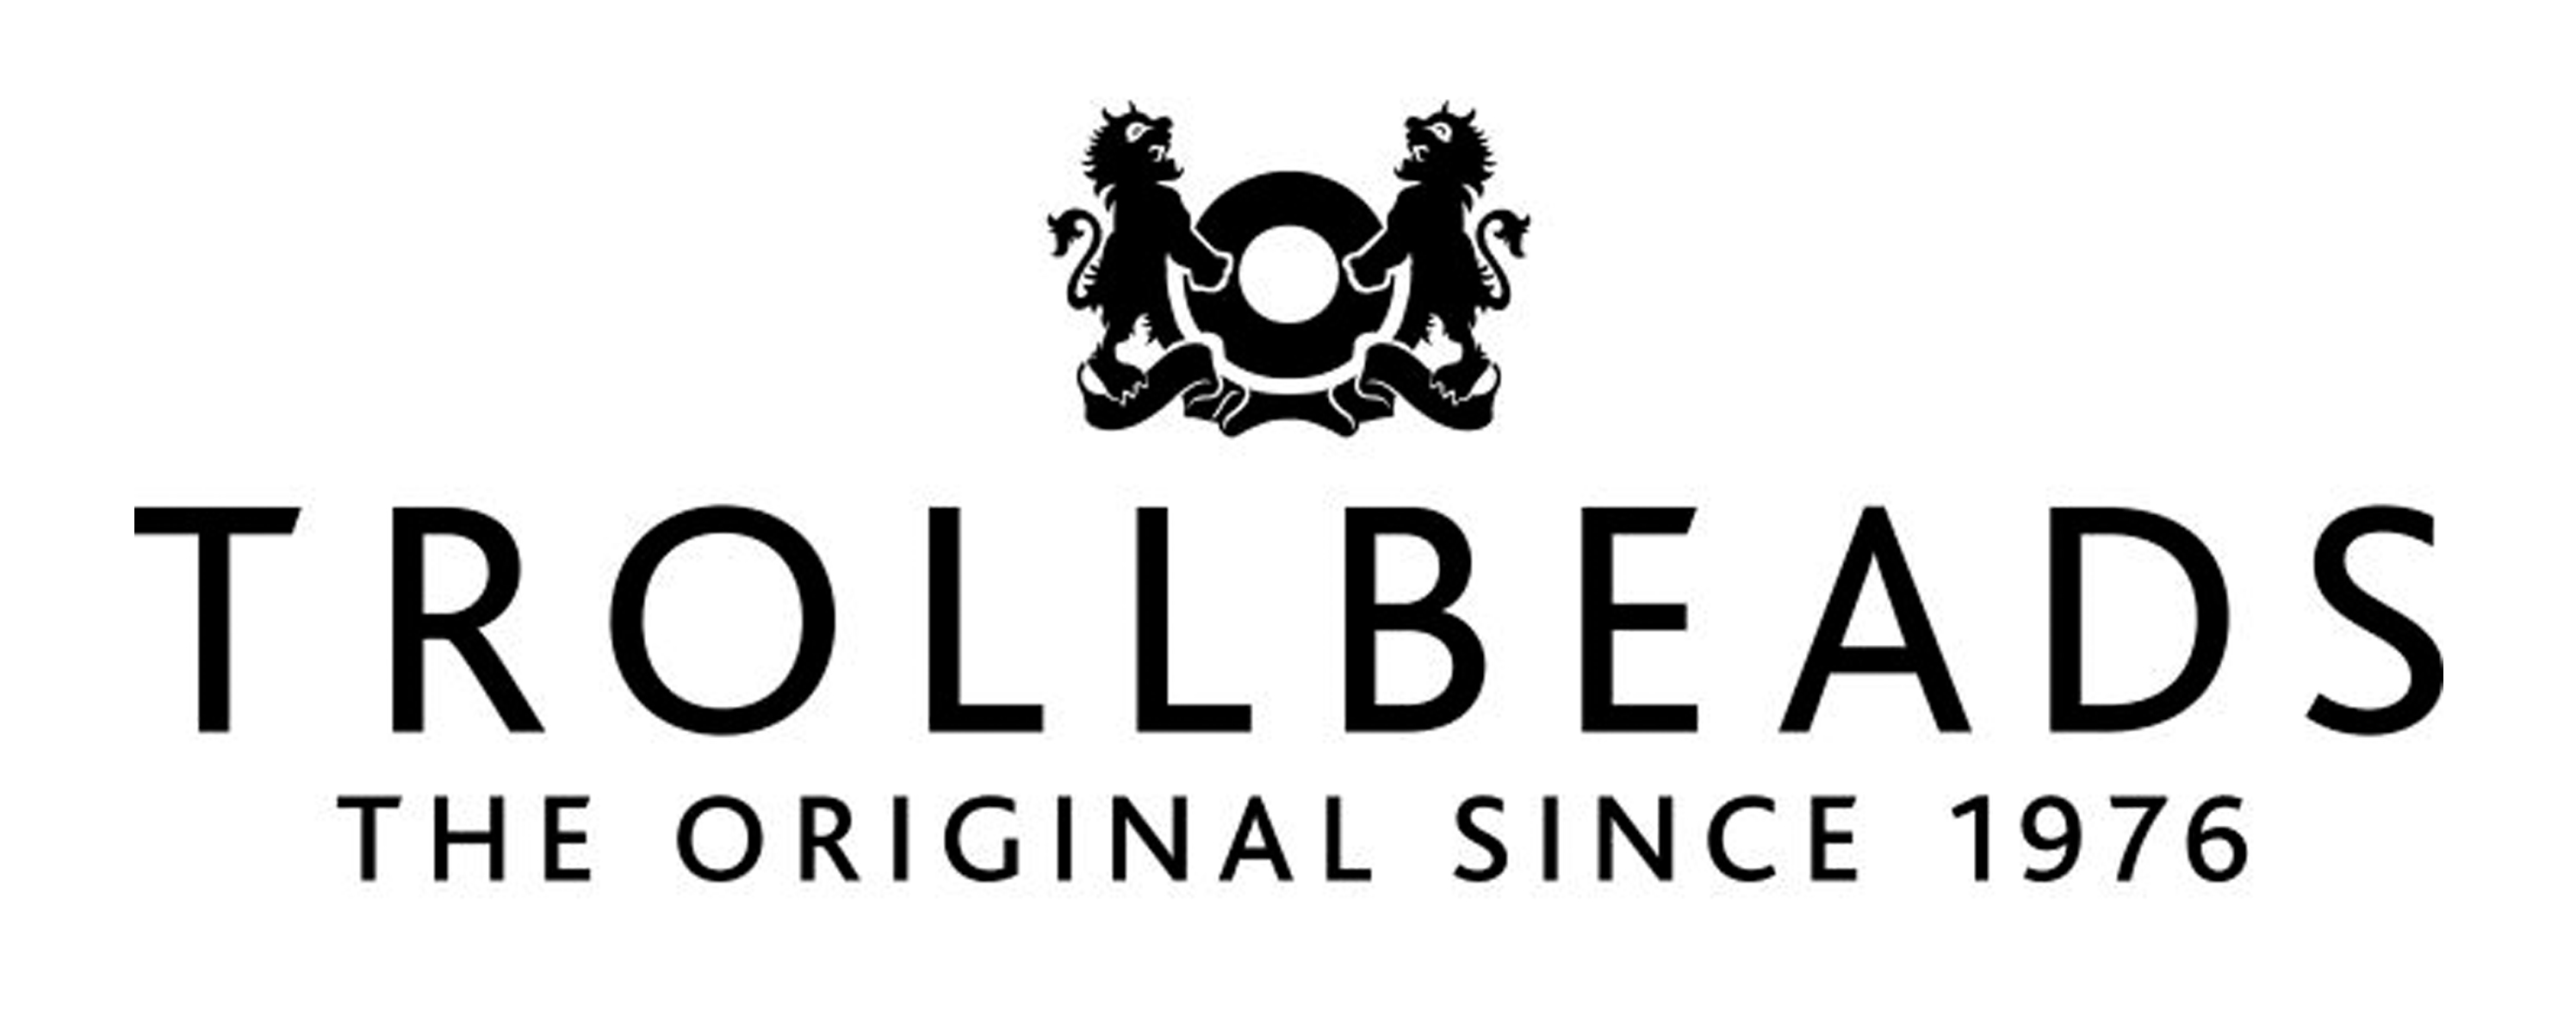 Trollbeads Retail Assistant Store Manager – Full-Time